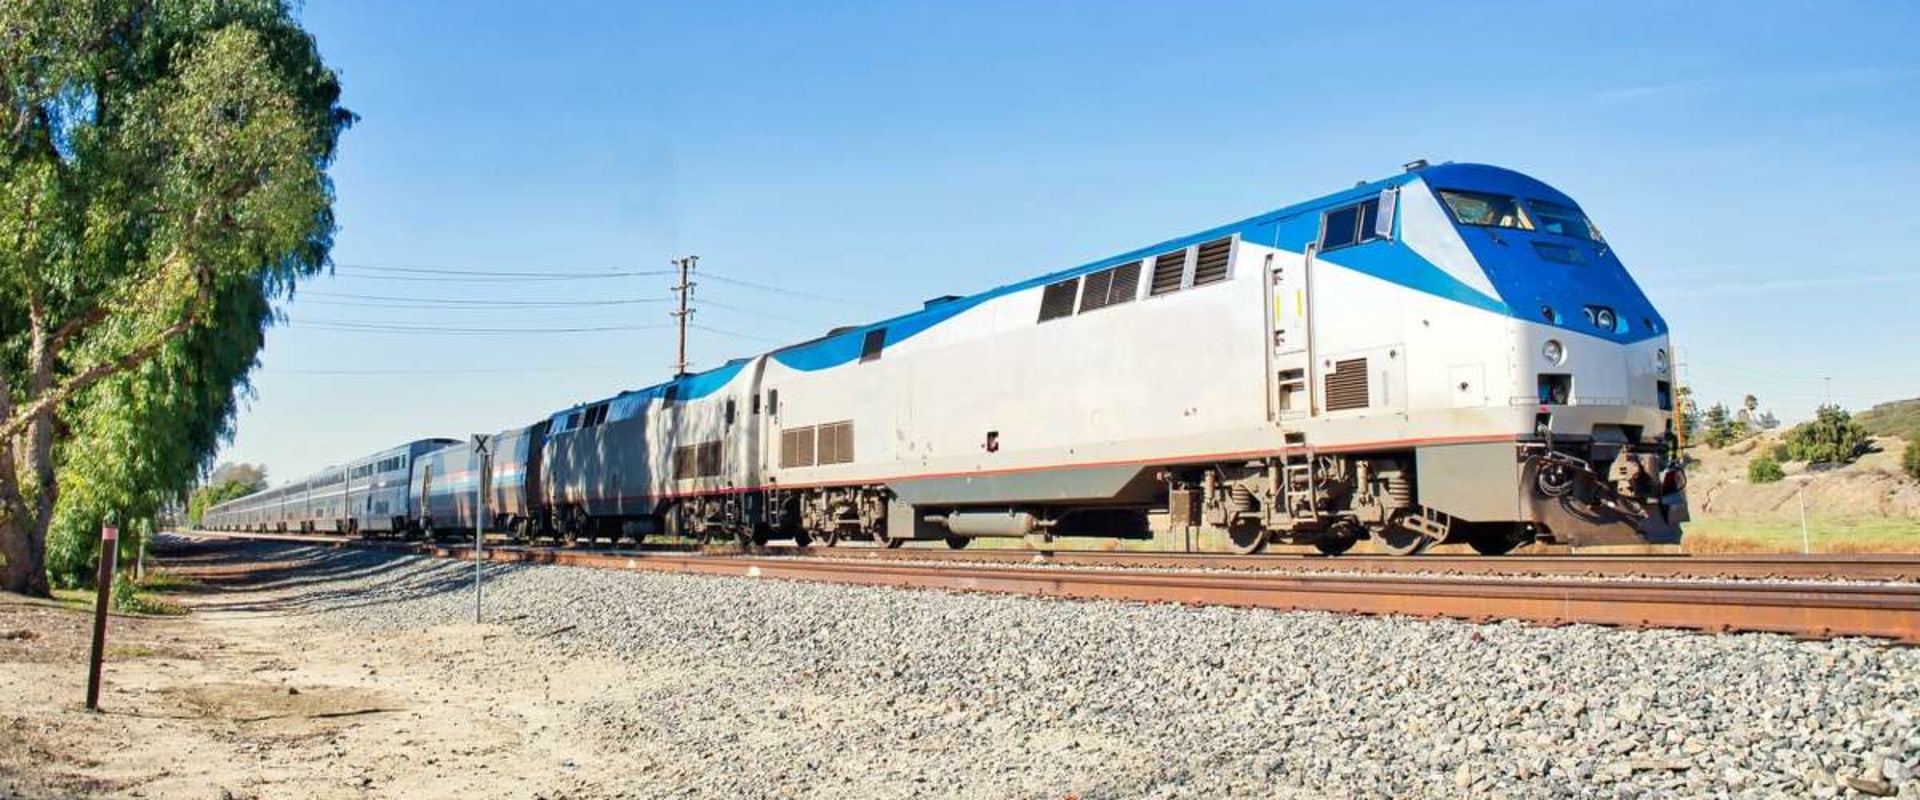 Experience Express Services on Trains in Austin, Texas